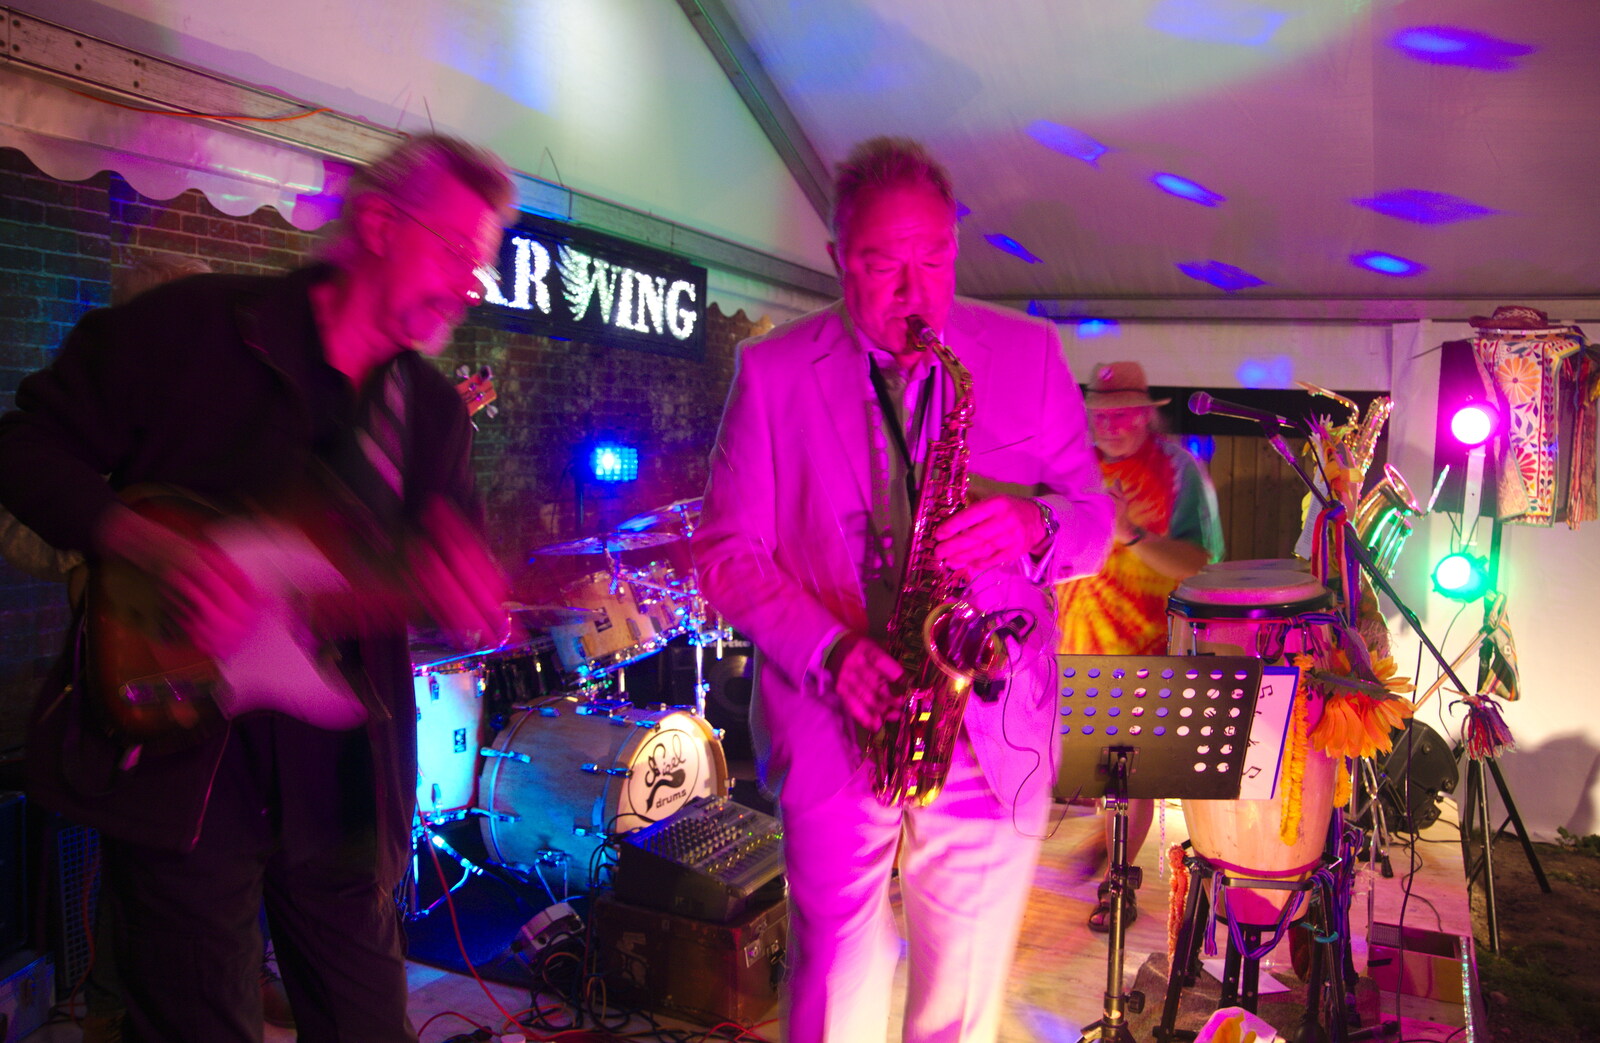 The sax player roams around from The Shakesbeer Festival, Star Wing Brewery, Redgrave, Suffolk - 13th July 2019